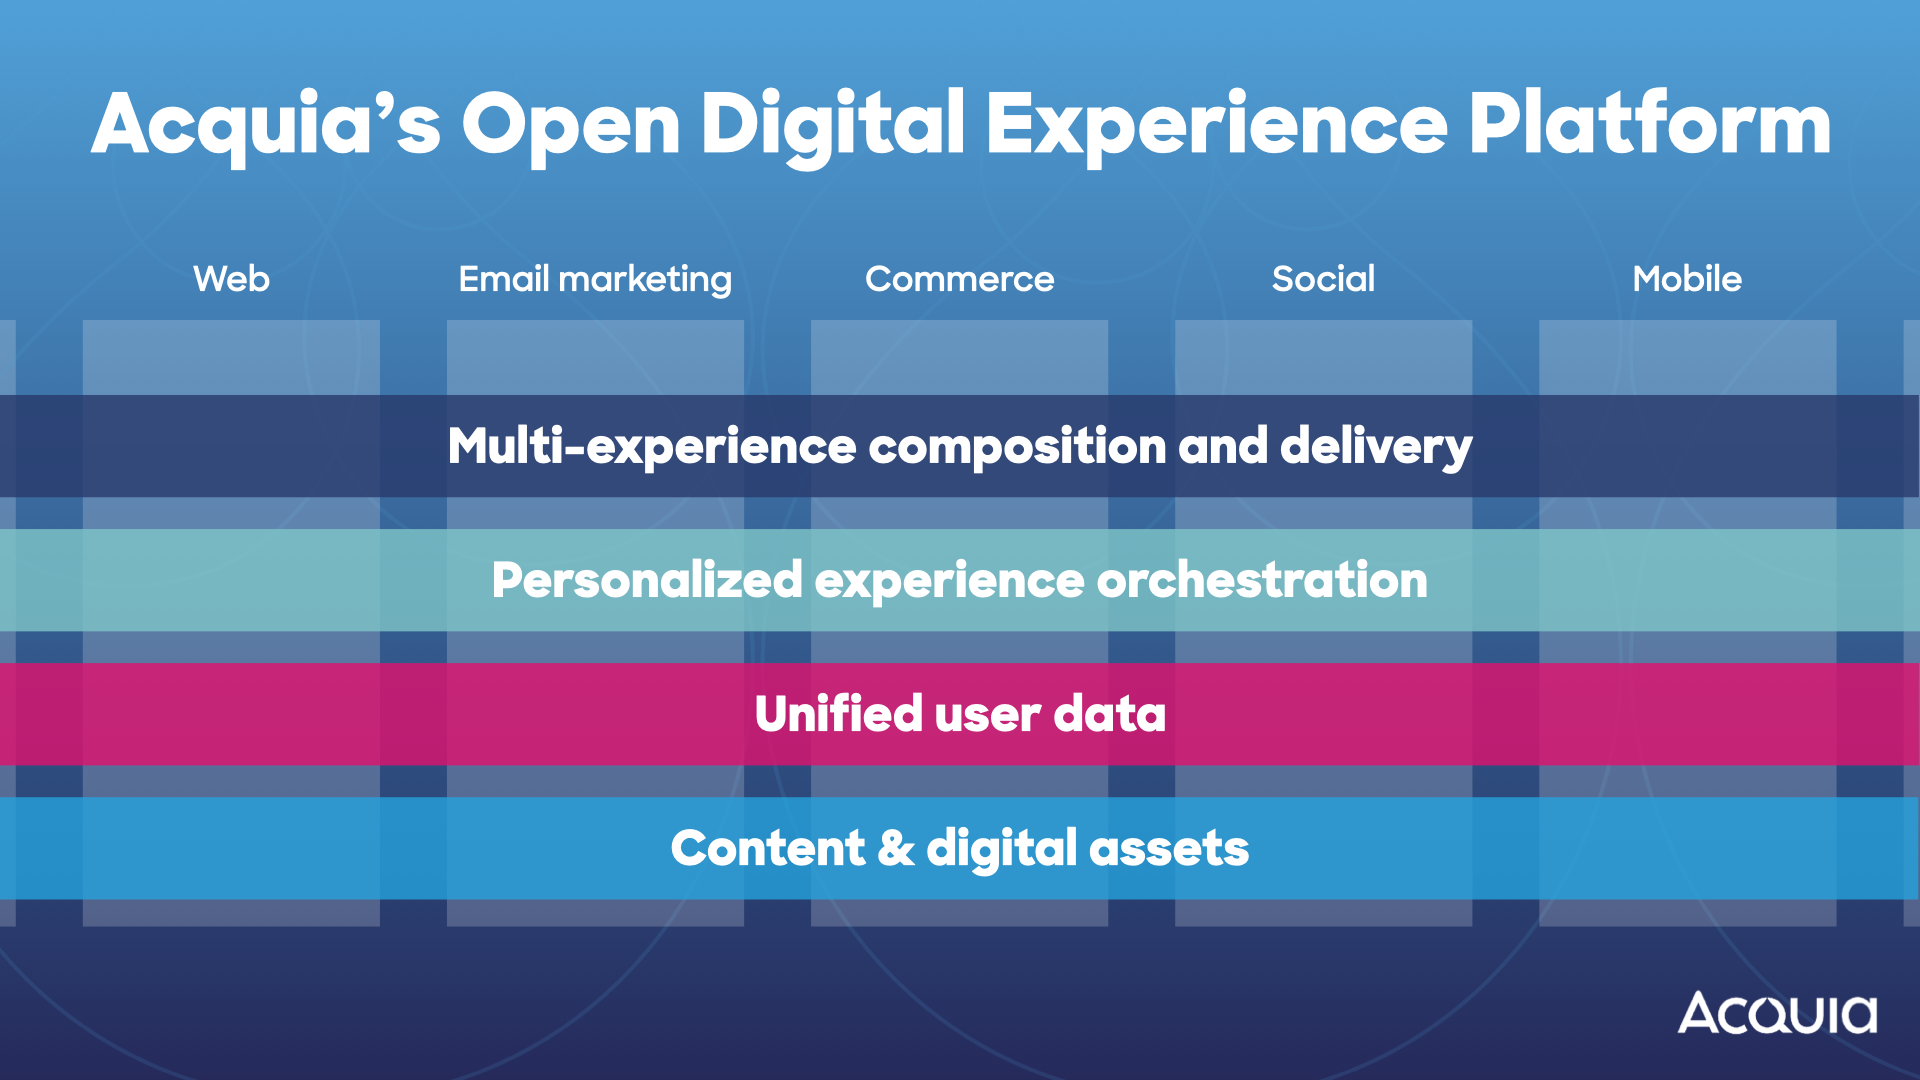 A diagram that shows how content, data, experience orchestration, and experience delivery needs to be unified across different systems such as content management systems, email marketing platforms, commerce solutions and more.